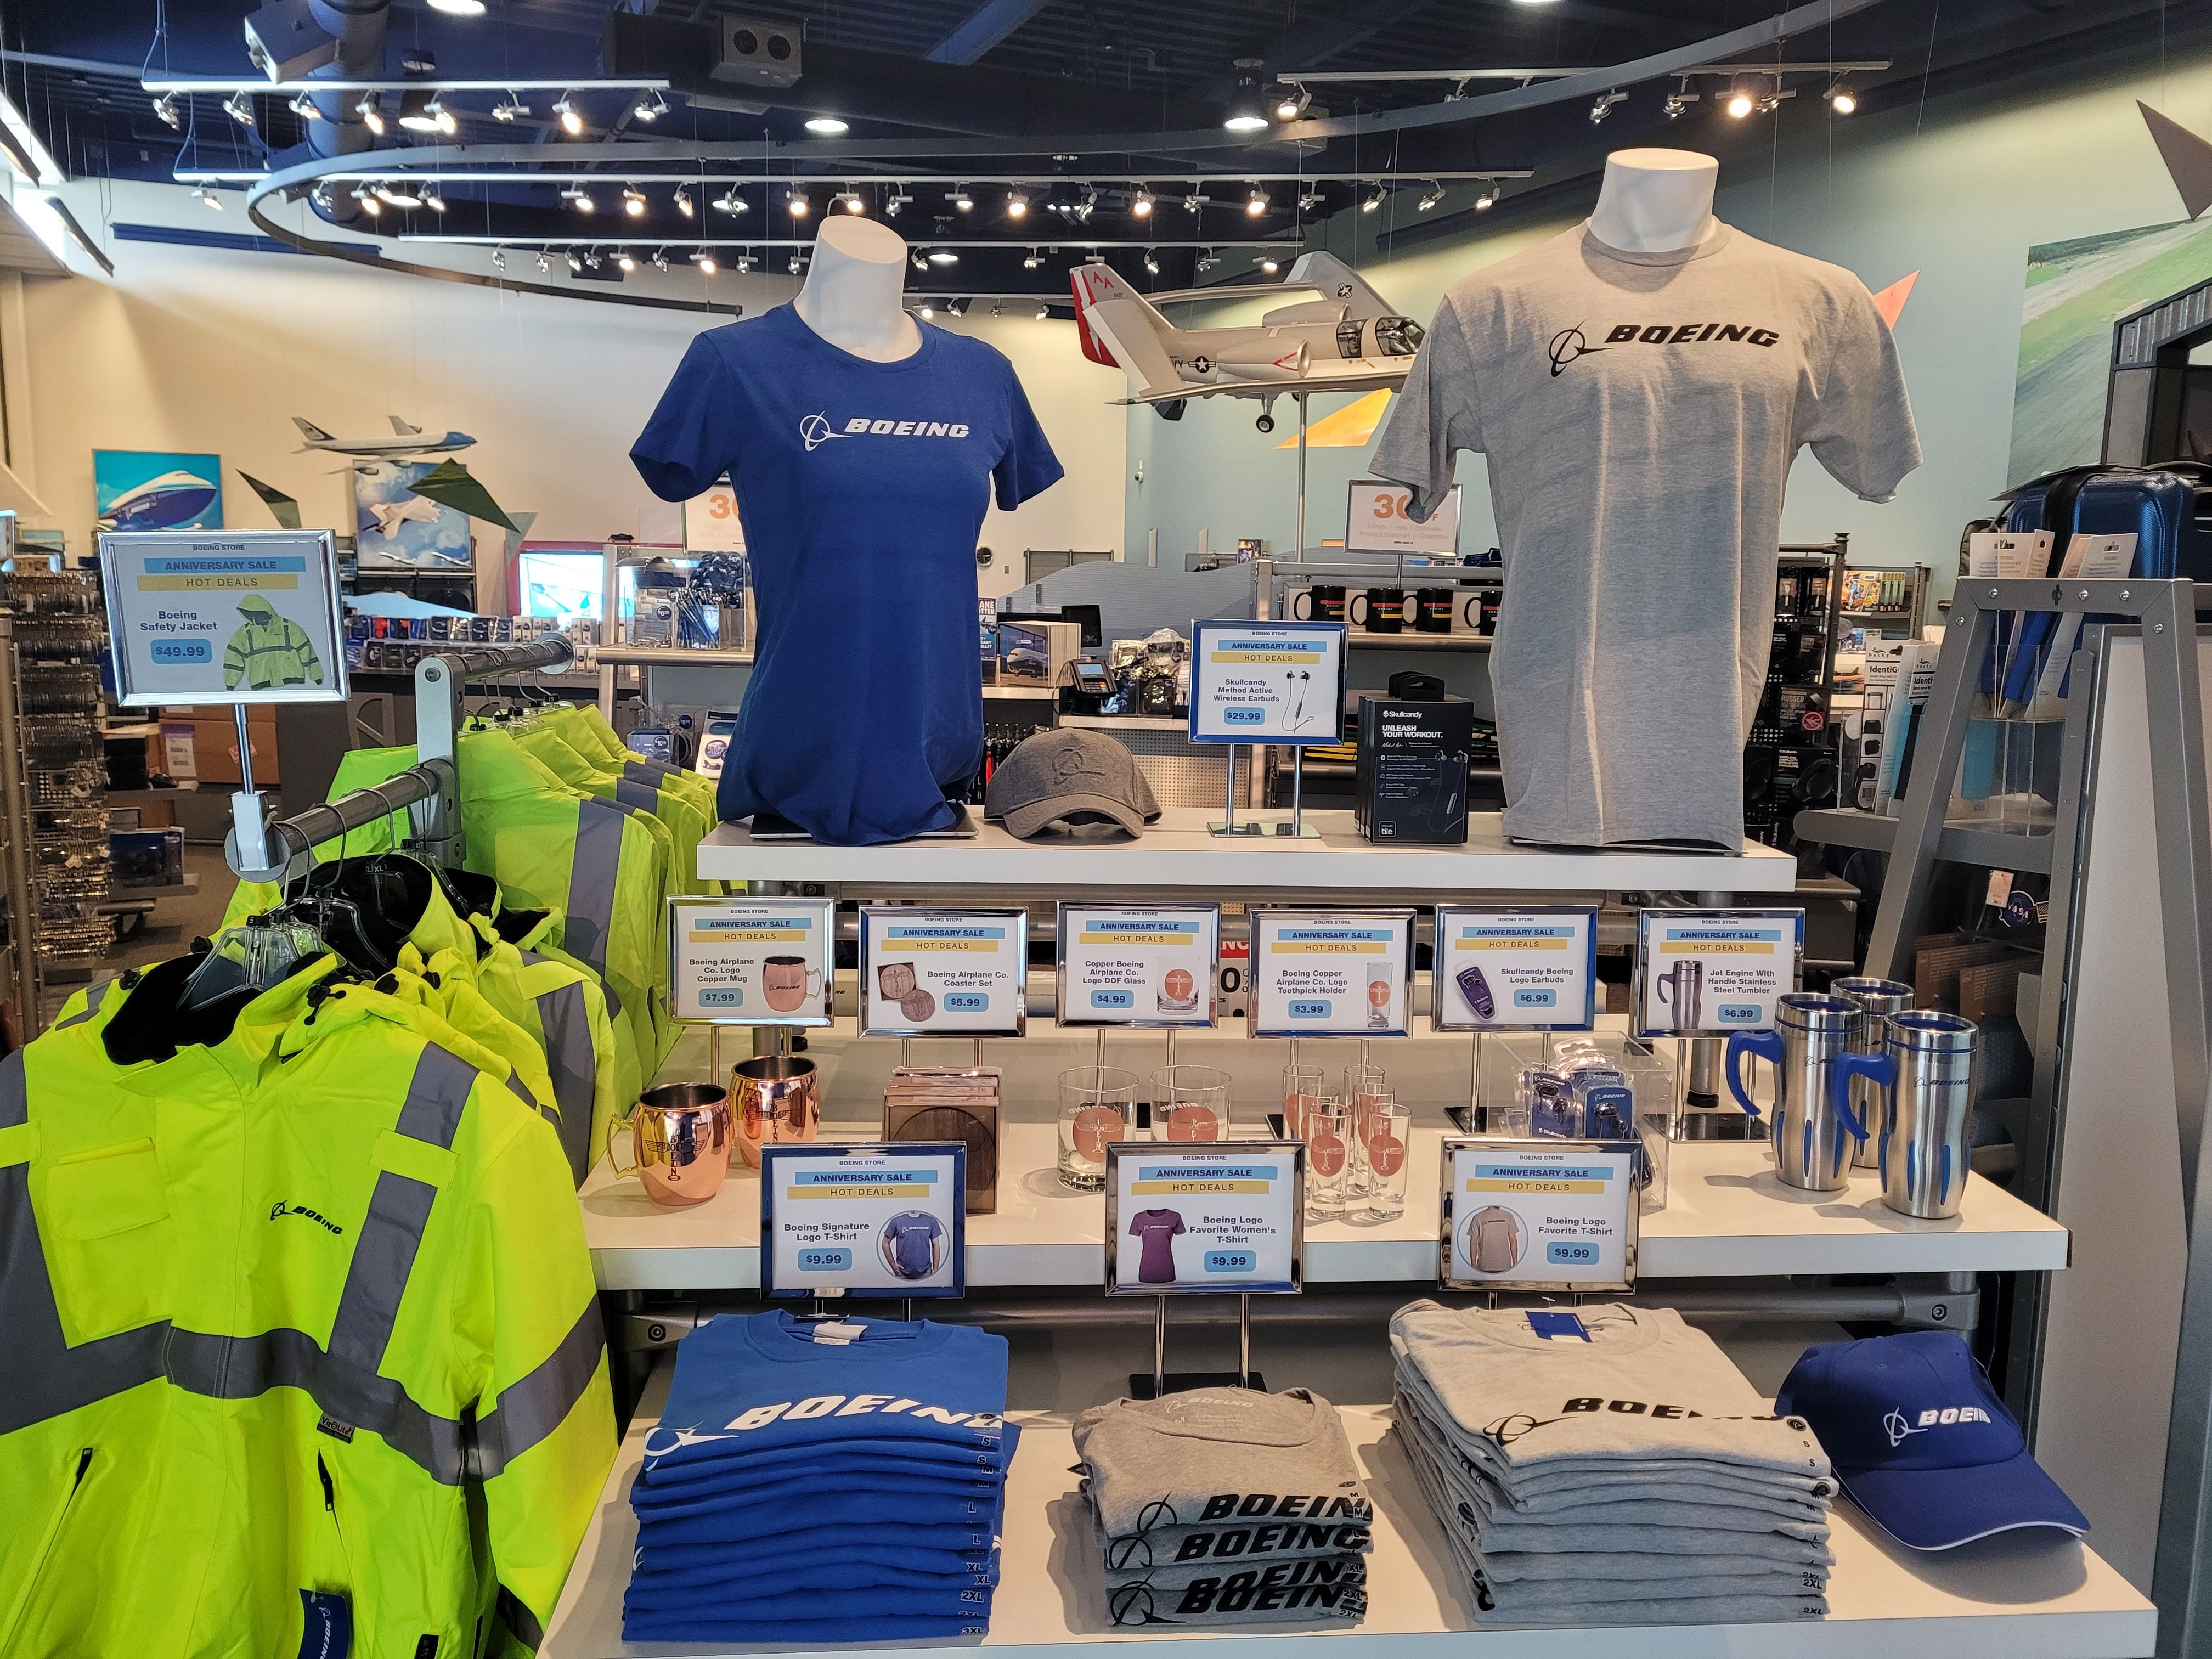 Several items of apparel for sale at the Boeing Store.